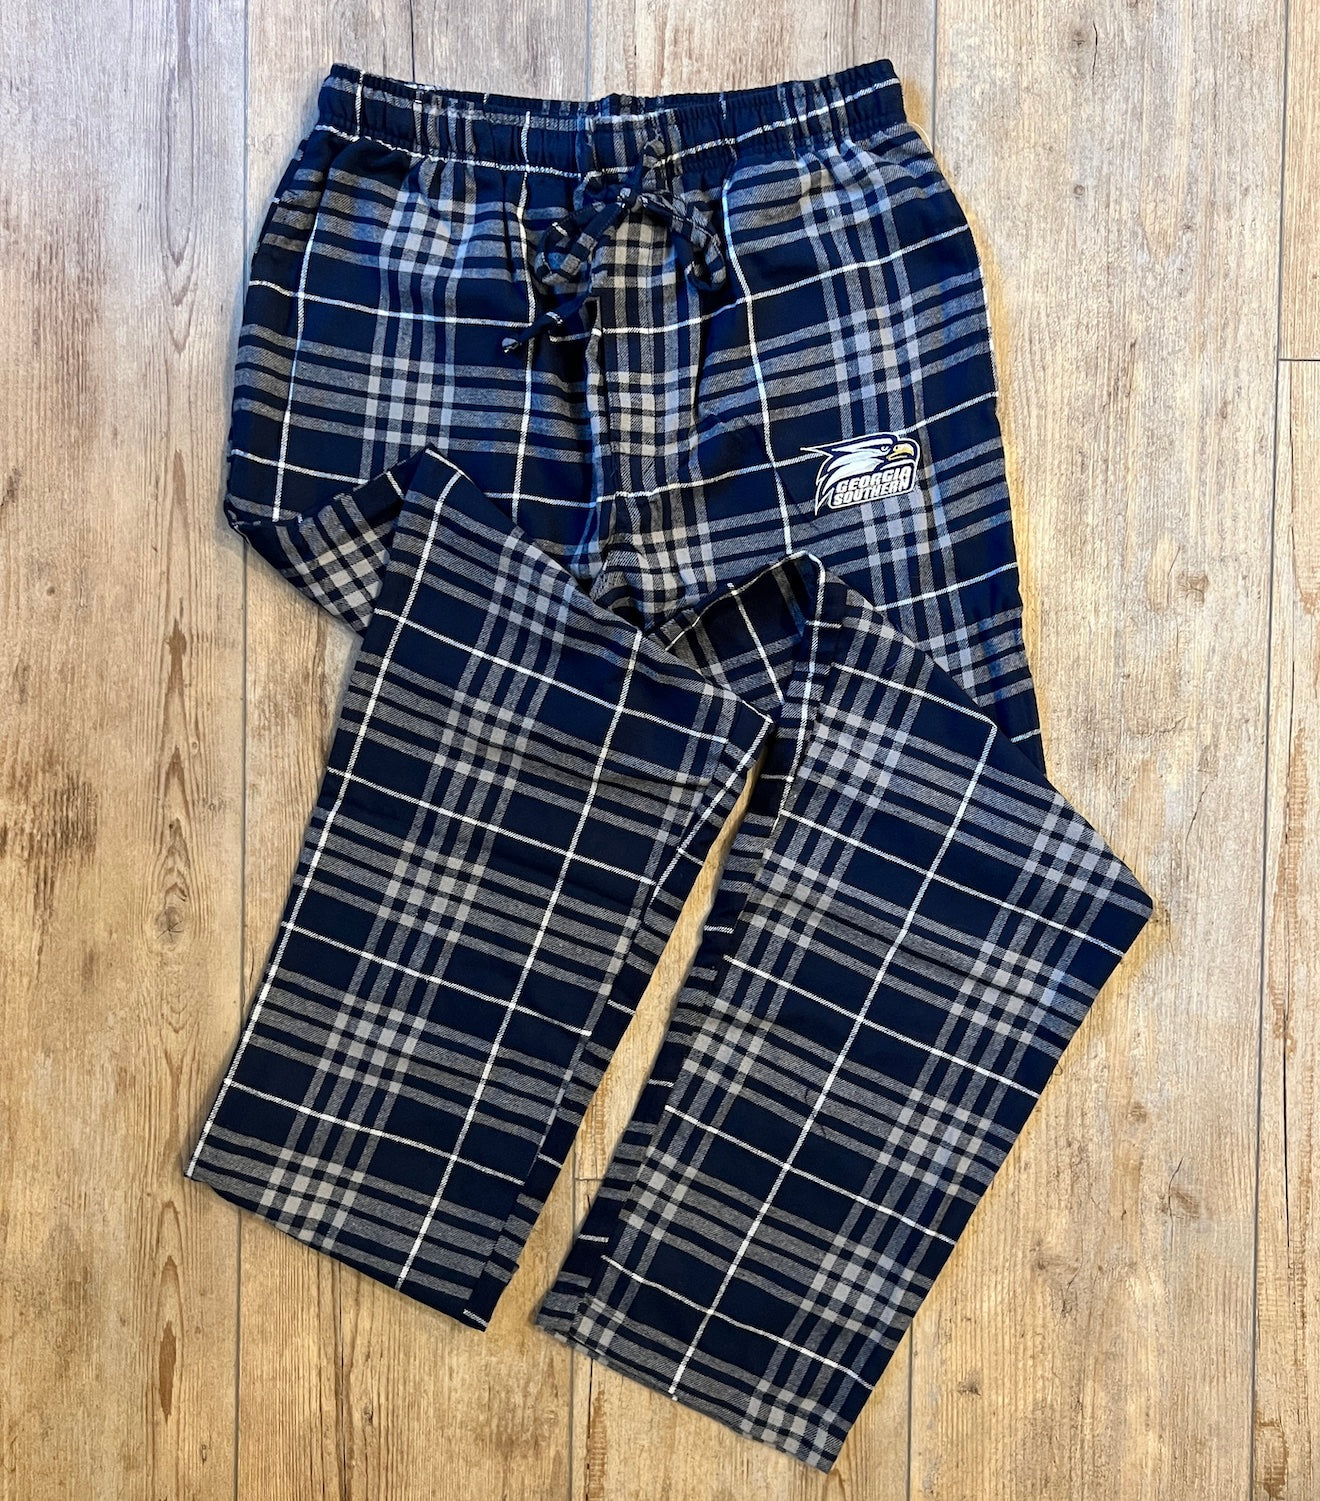 Flannel Plaid NAVY/GRAY Unisex Lounge Pants by Concepts Sport